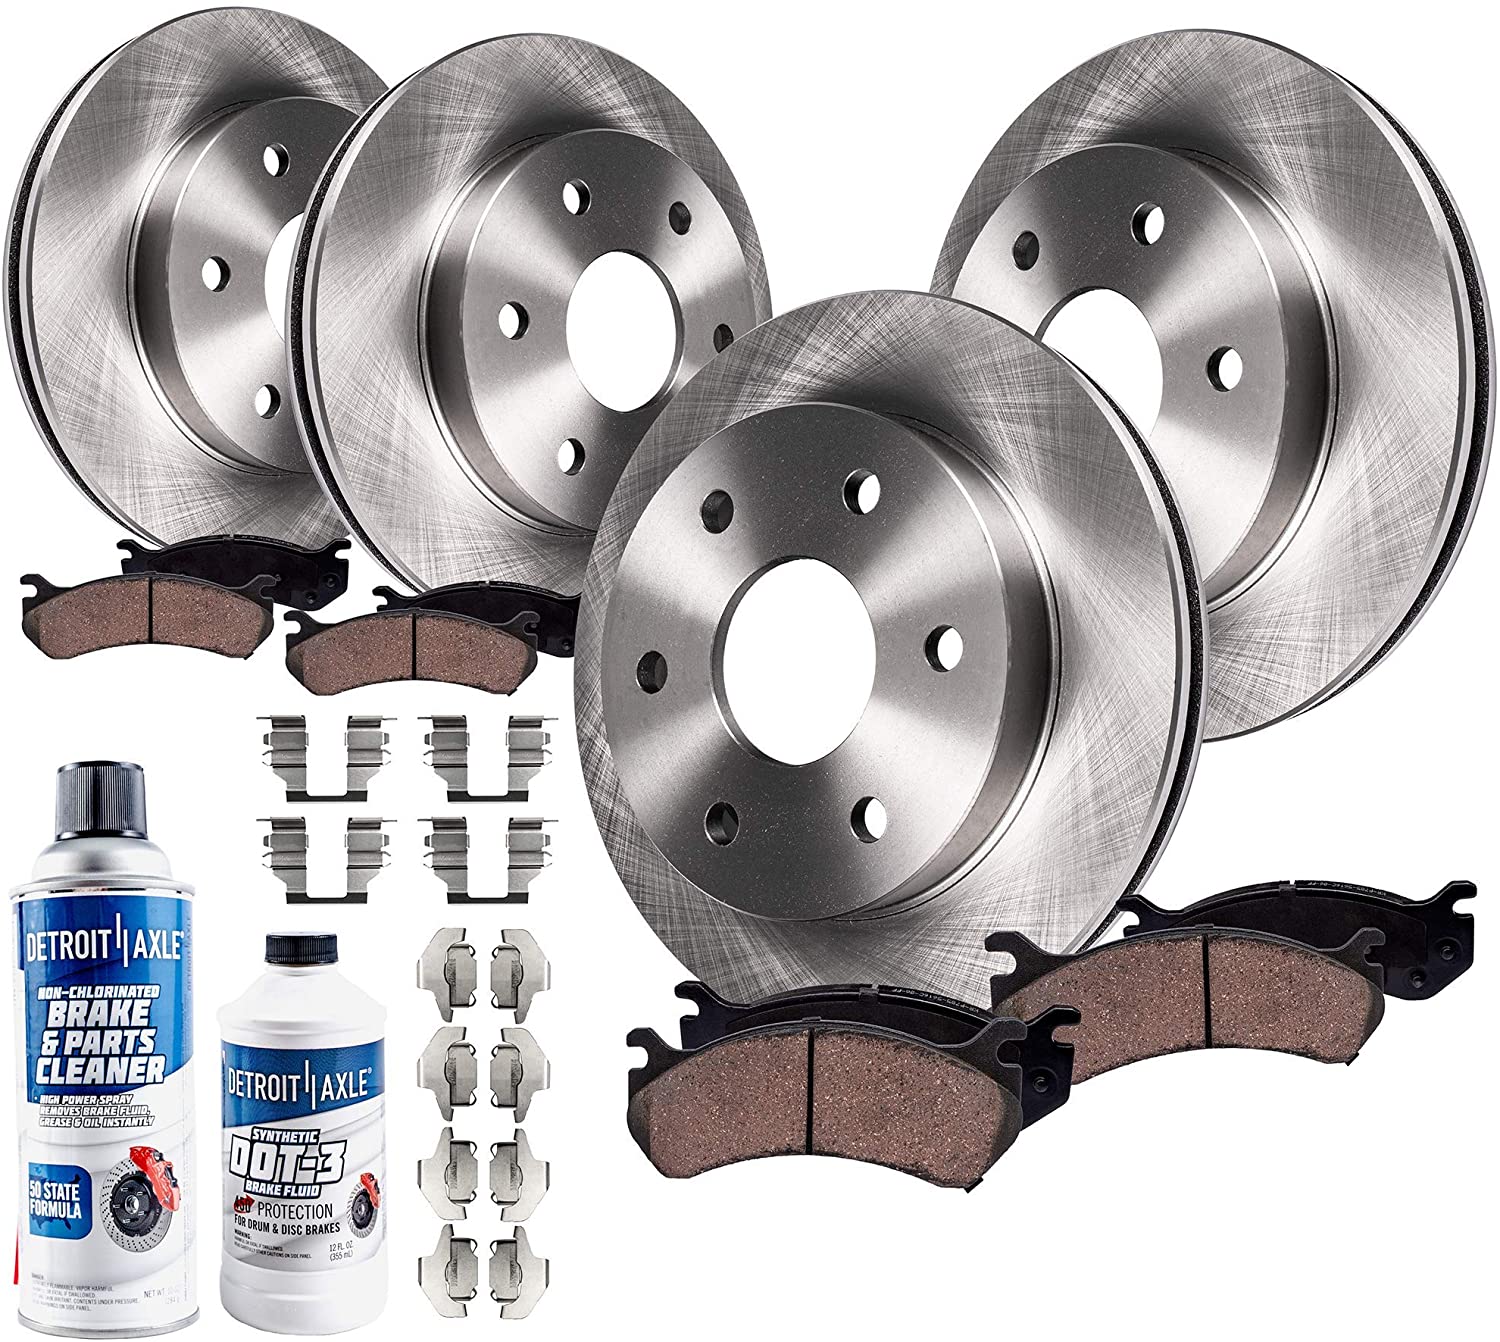 Detroit Axle - All (4) Front and Rear Disc Brake Kit Rotors w/Ceramic Pads & Brake Kit Cleaner & Fluid for 2007 2008 2009 Ford Expedition/Lincoln Navigator